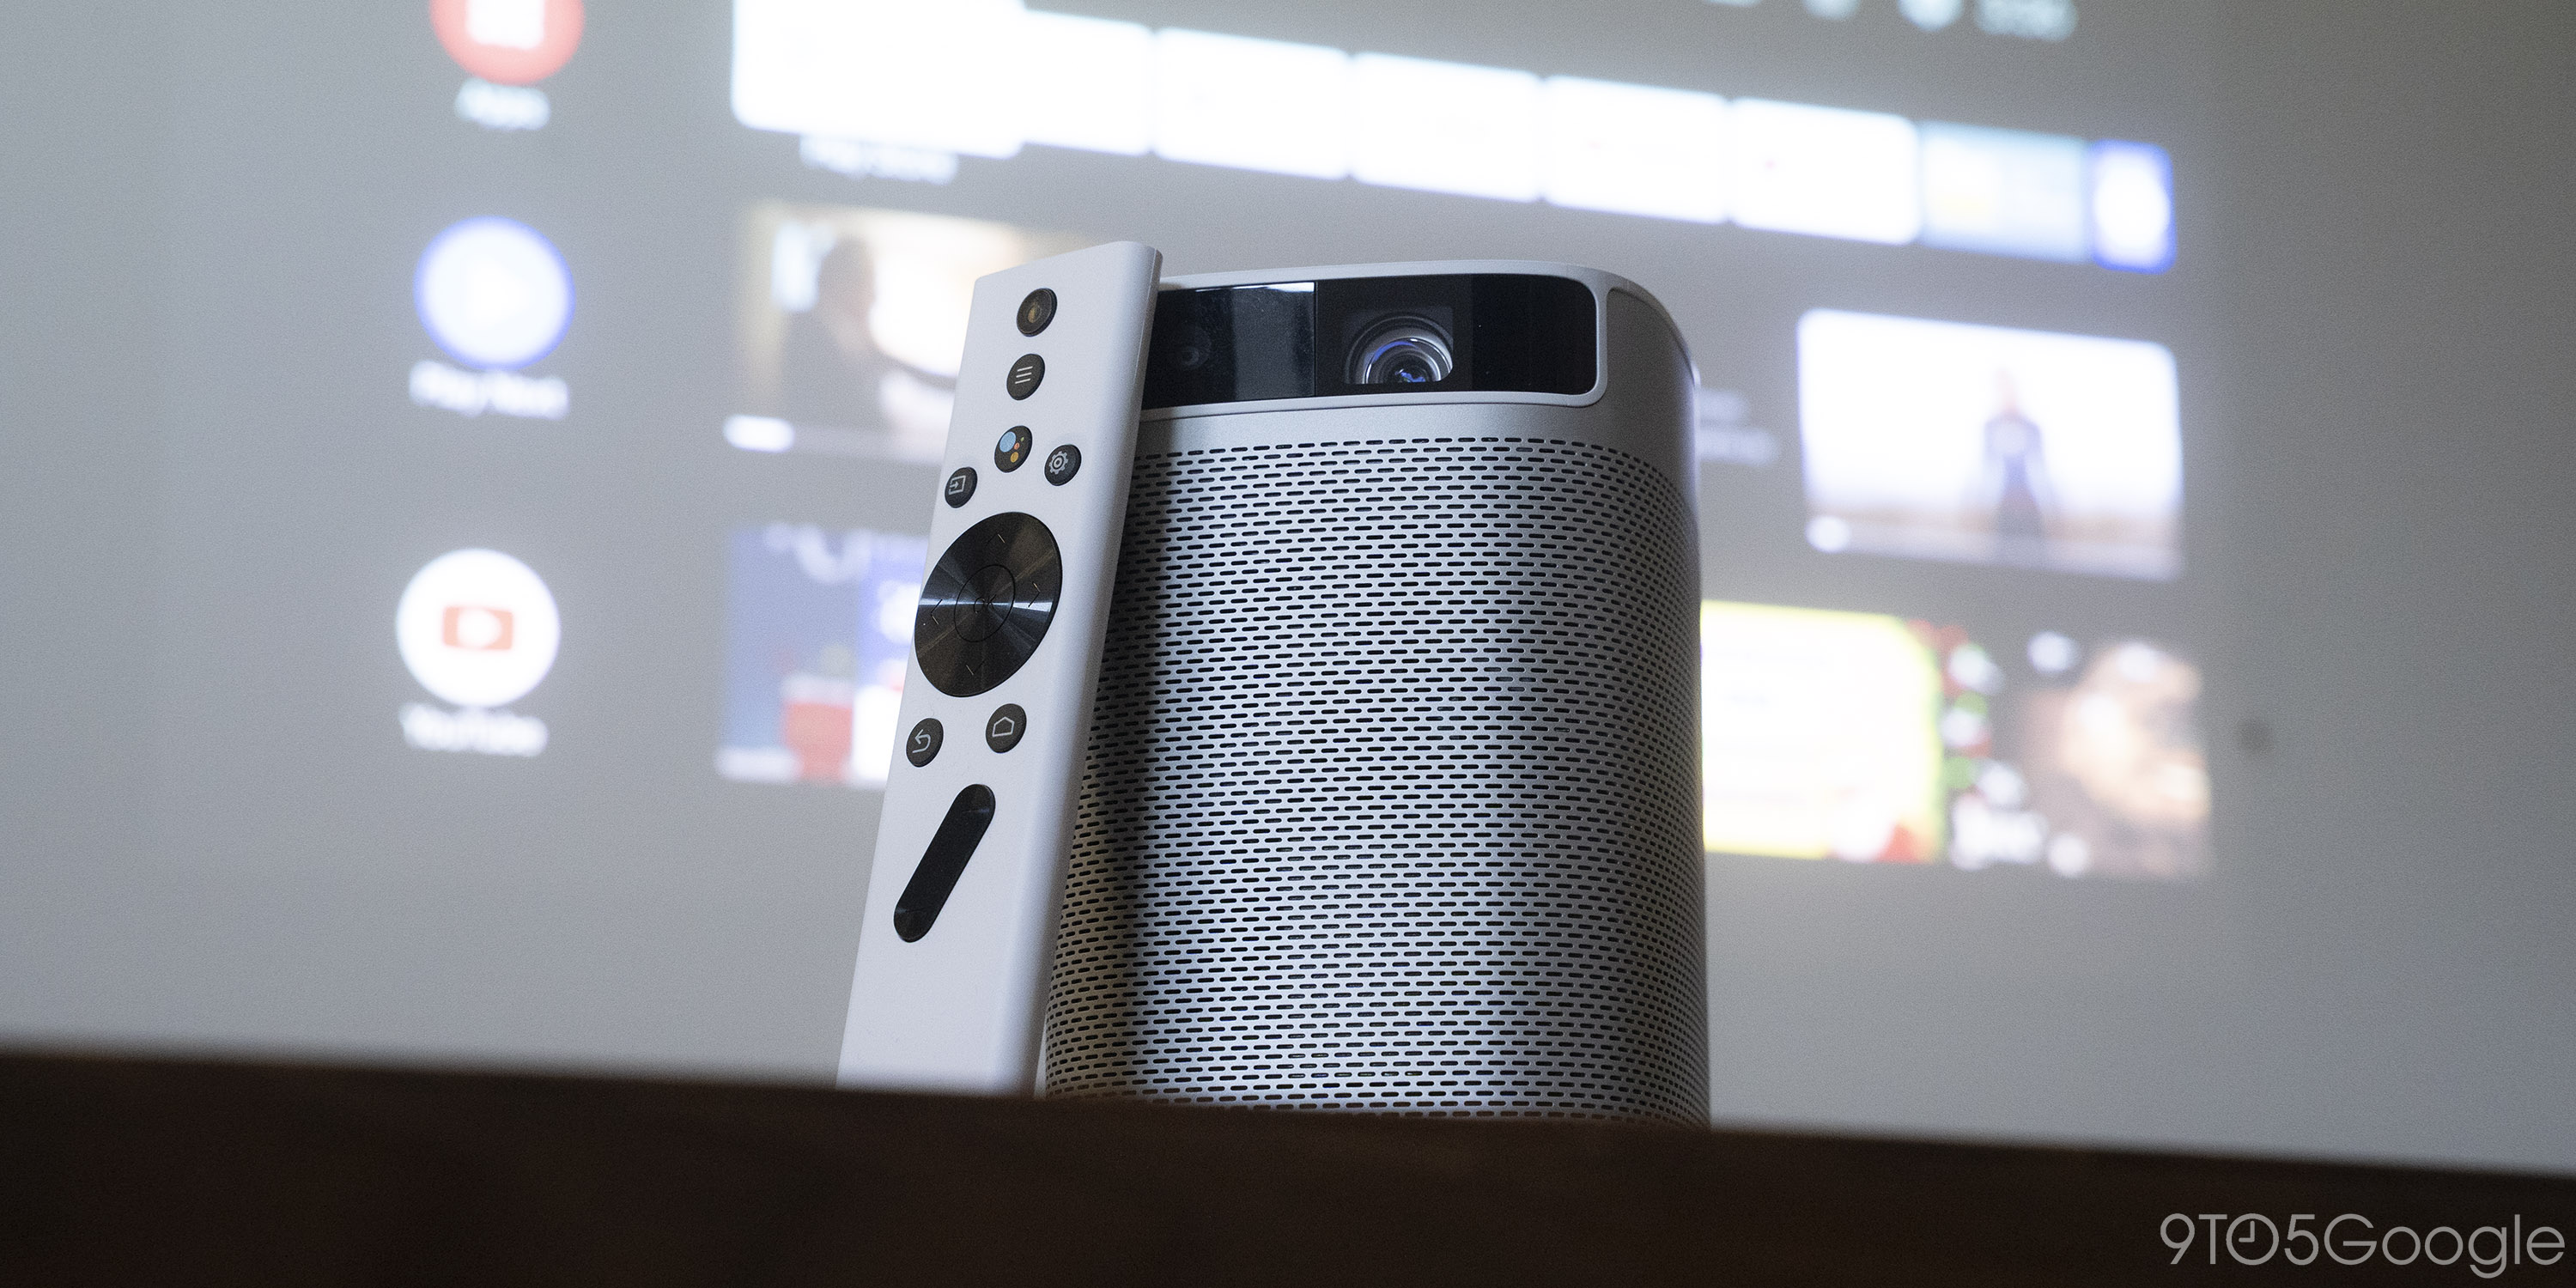 XGIMI MoGo Pro is an Android TV projector missing content 